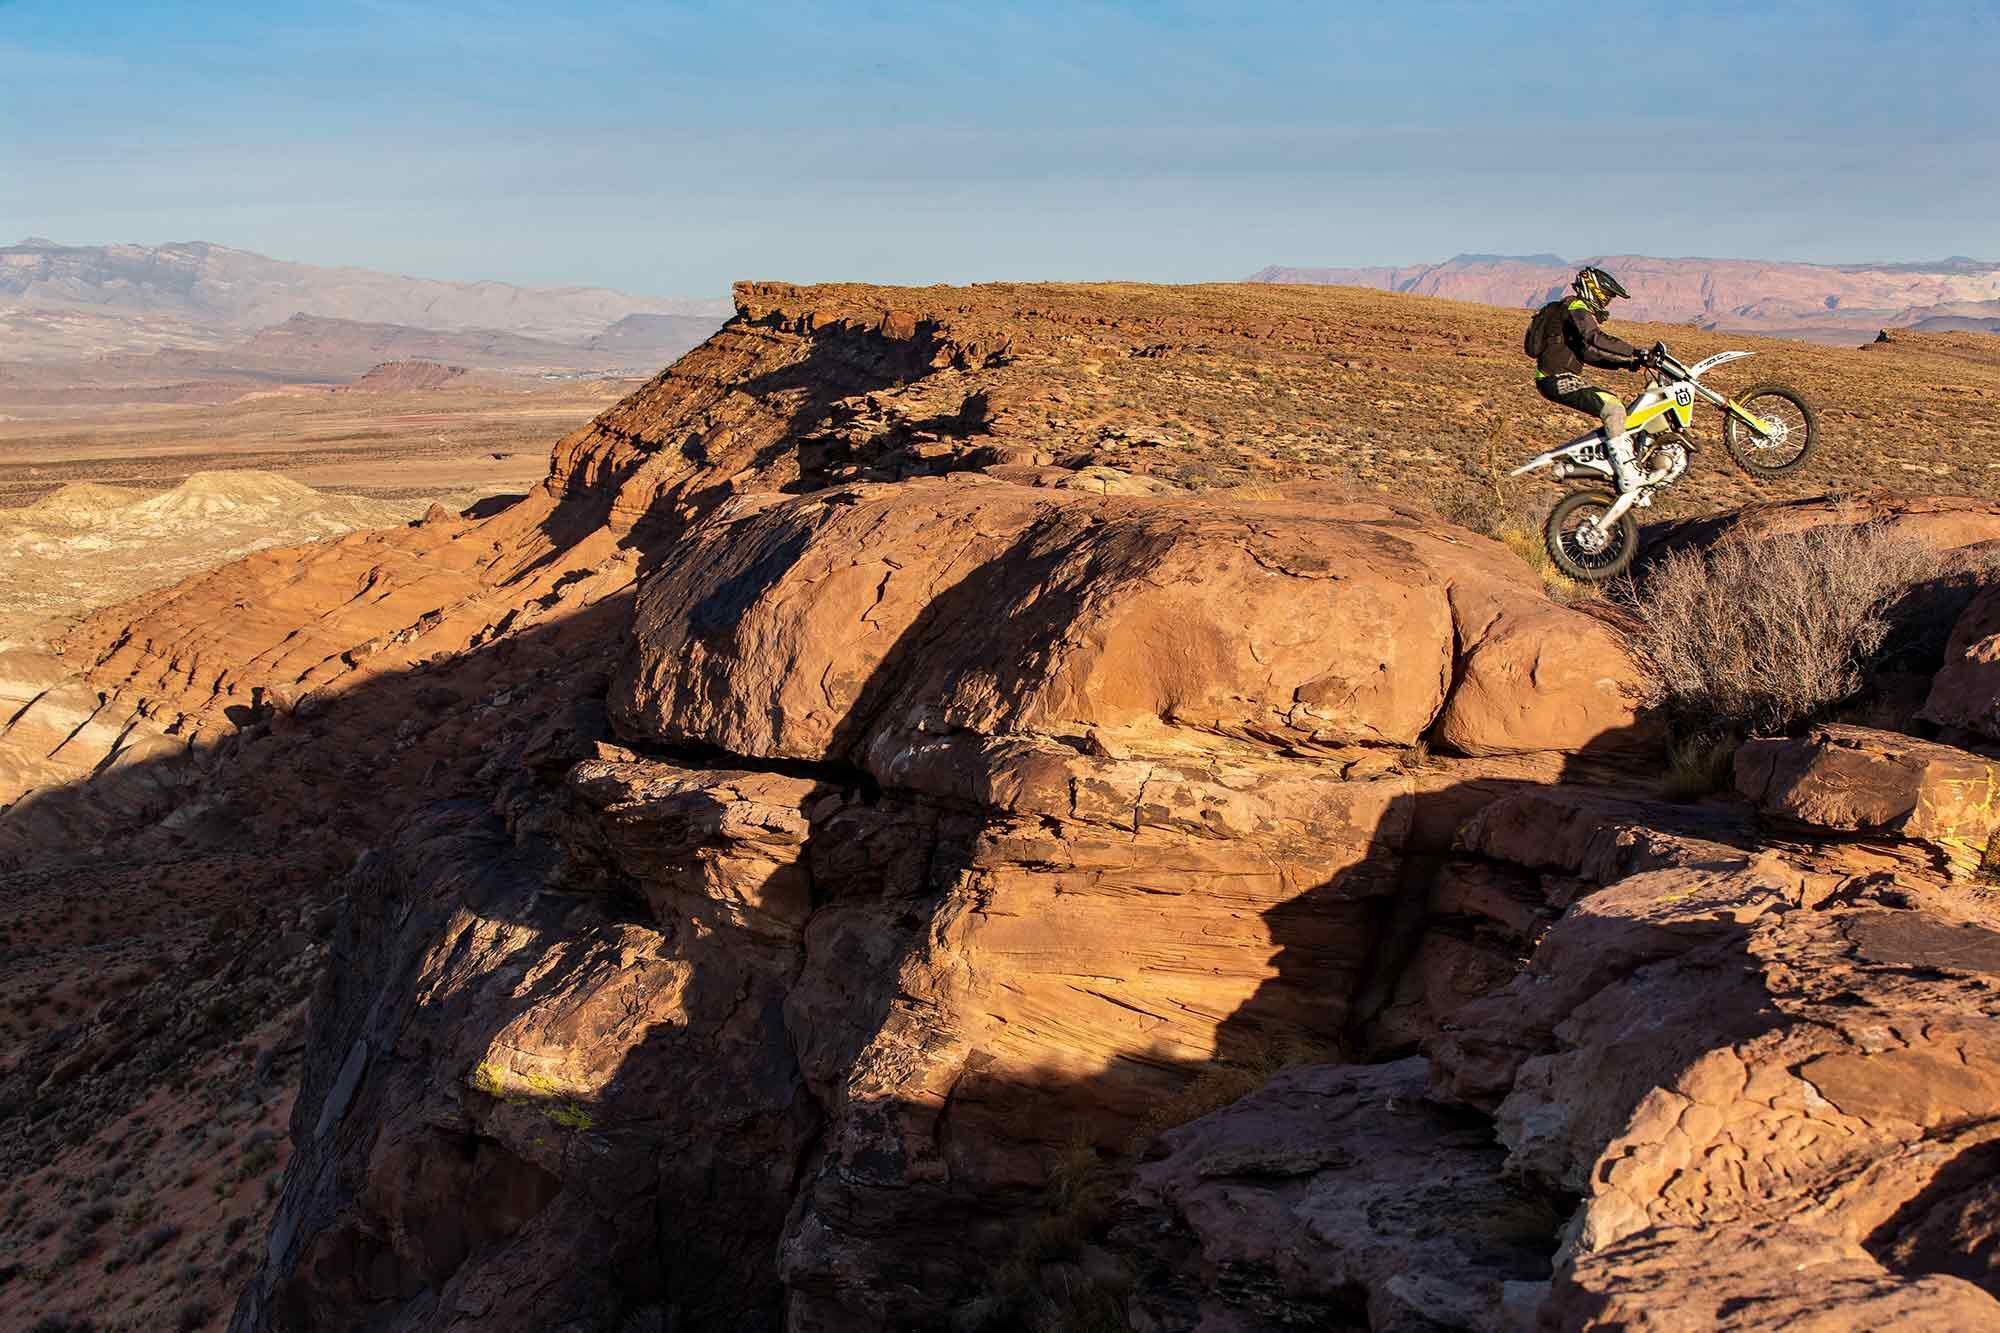 “The Husqvarna’s clutch feel was good by way of the Magura master cylinder. However, it stalls easier than any other bike I’ve ridden.” —Ty Cullins